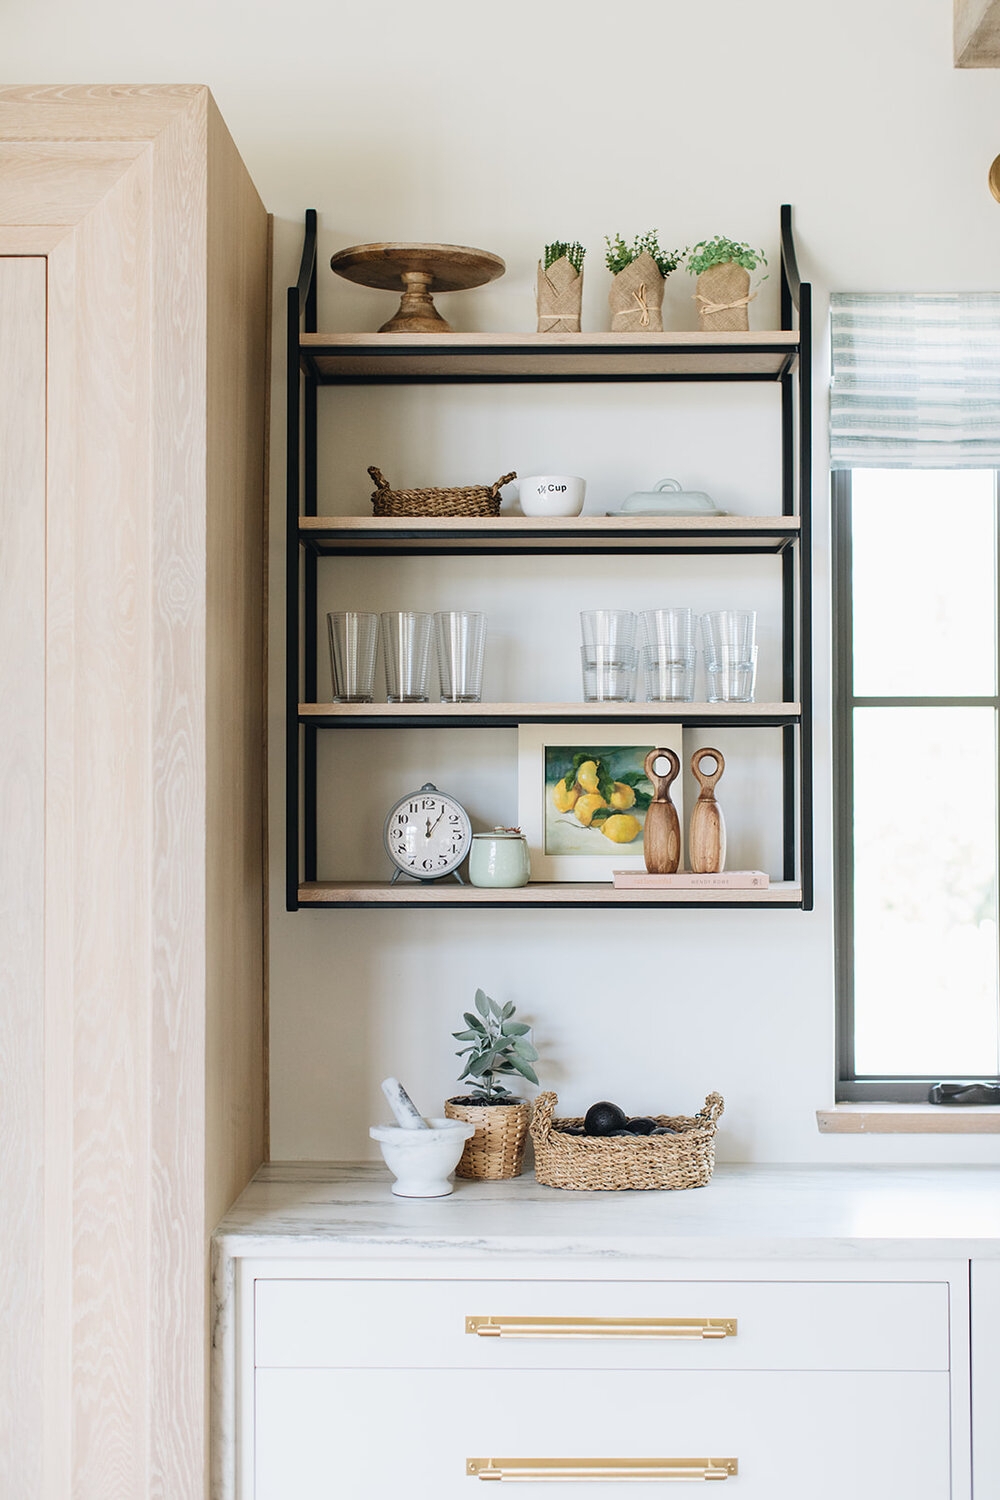 24 Ideas for Kitchens With Open Shelving